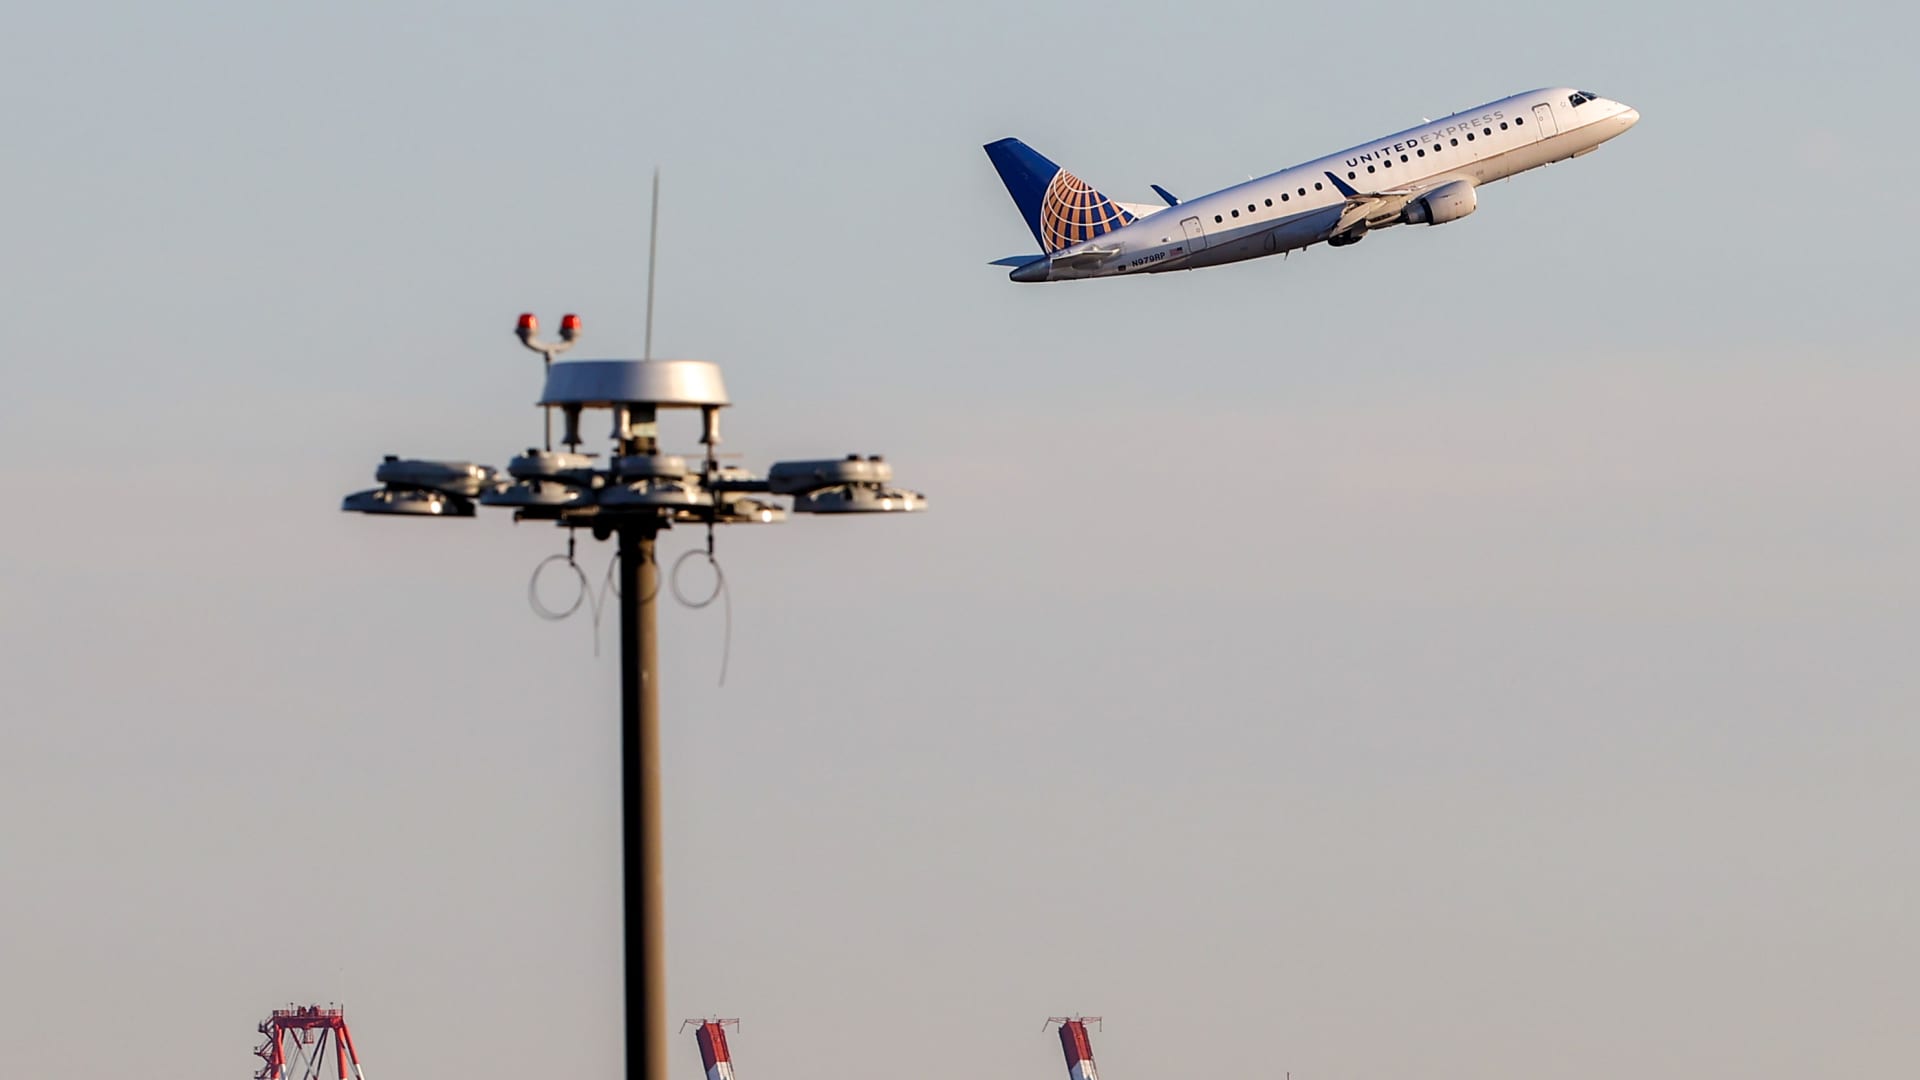 A passenger airplane is departing from Newark Liberty International Airport in Newark, New Jersey, on January 19, 2022.